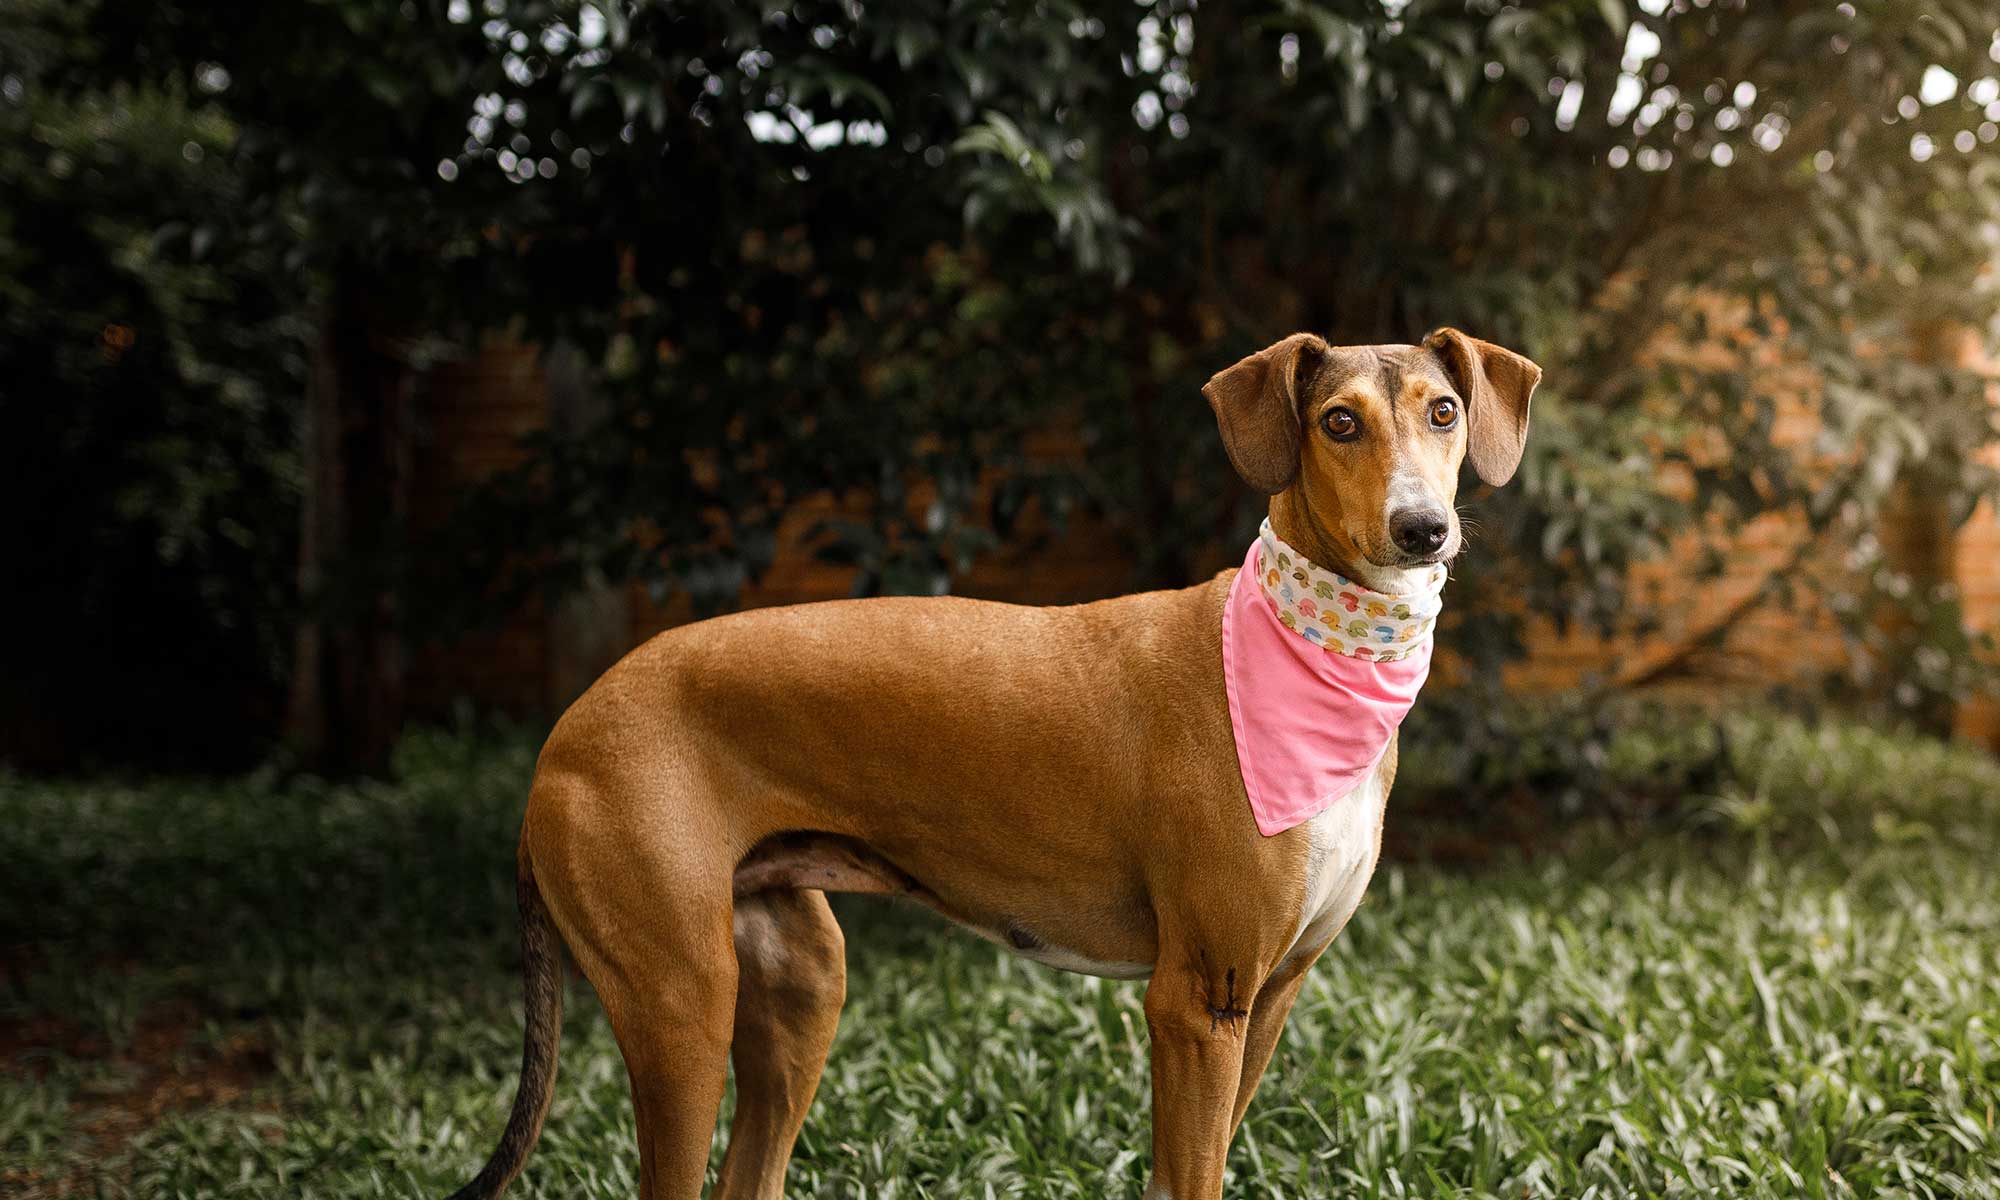 A brown dog wearing a scarf in a field